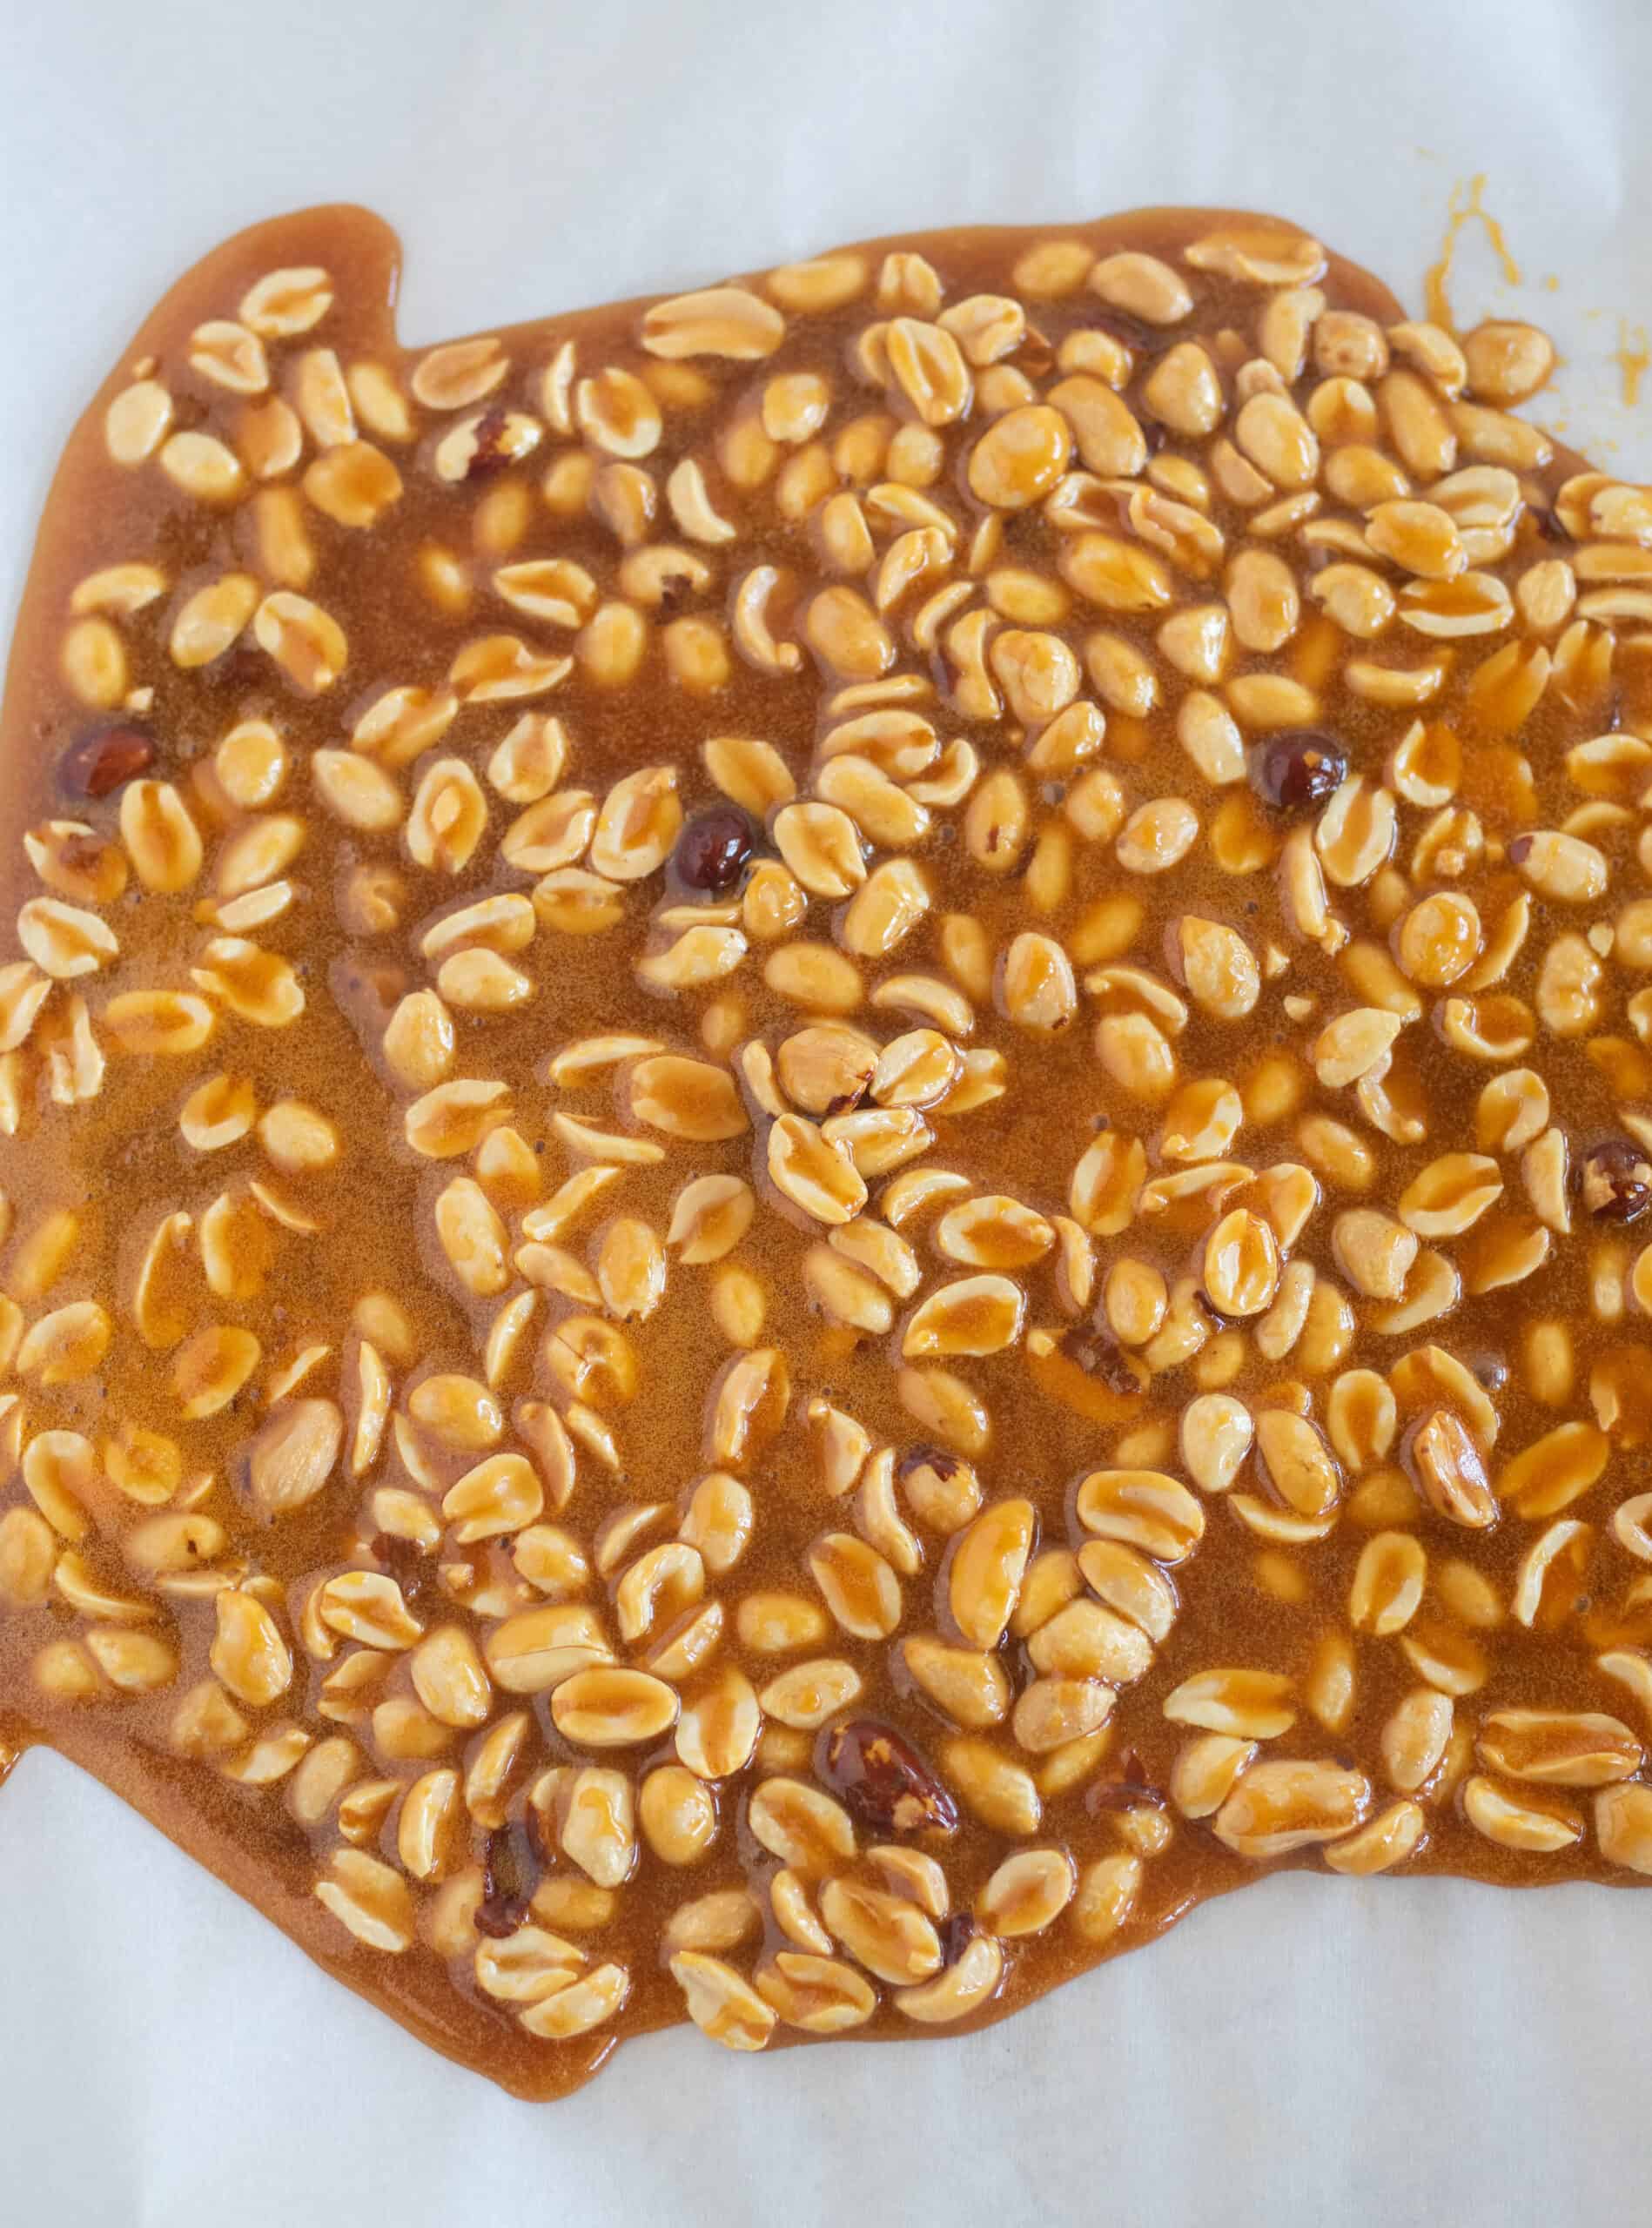 peanut brittle spread out on a lined baking sheet.